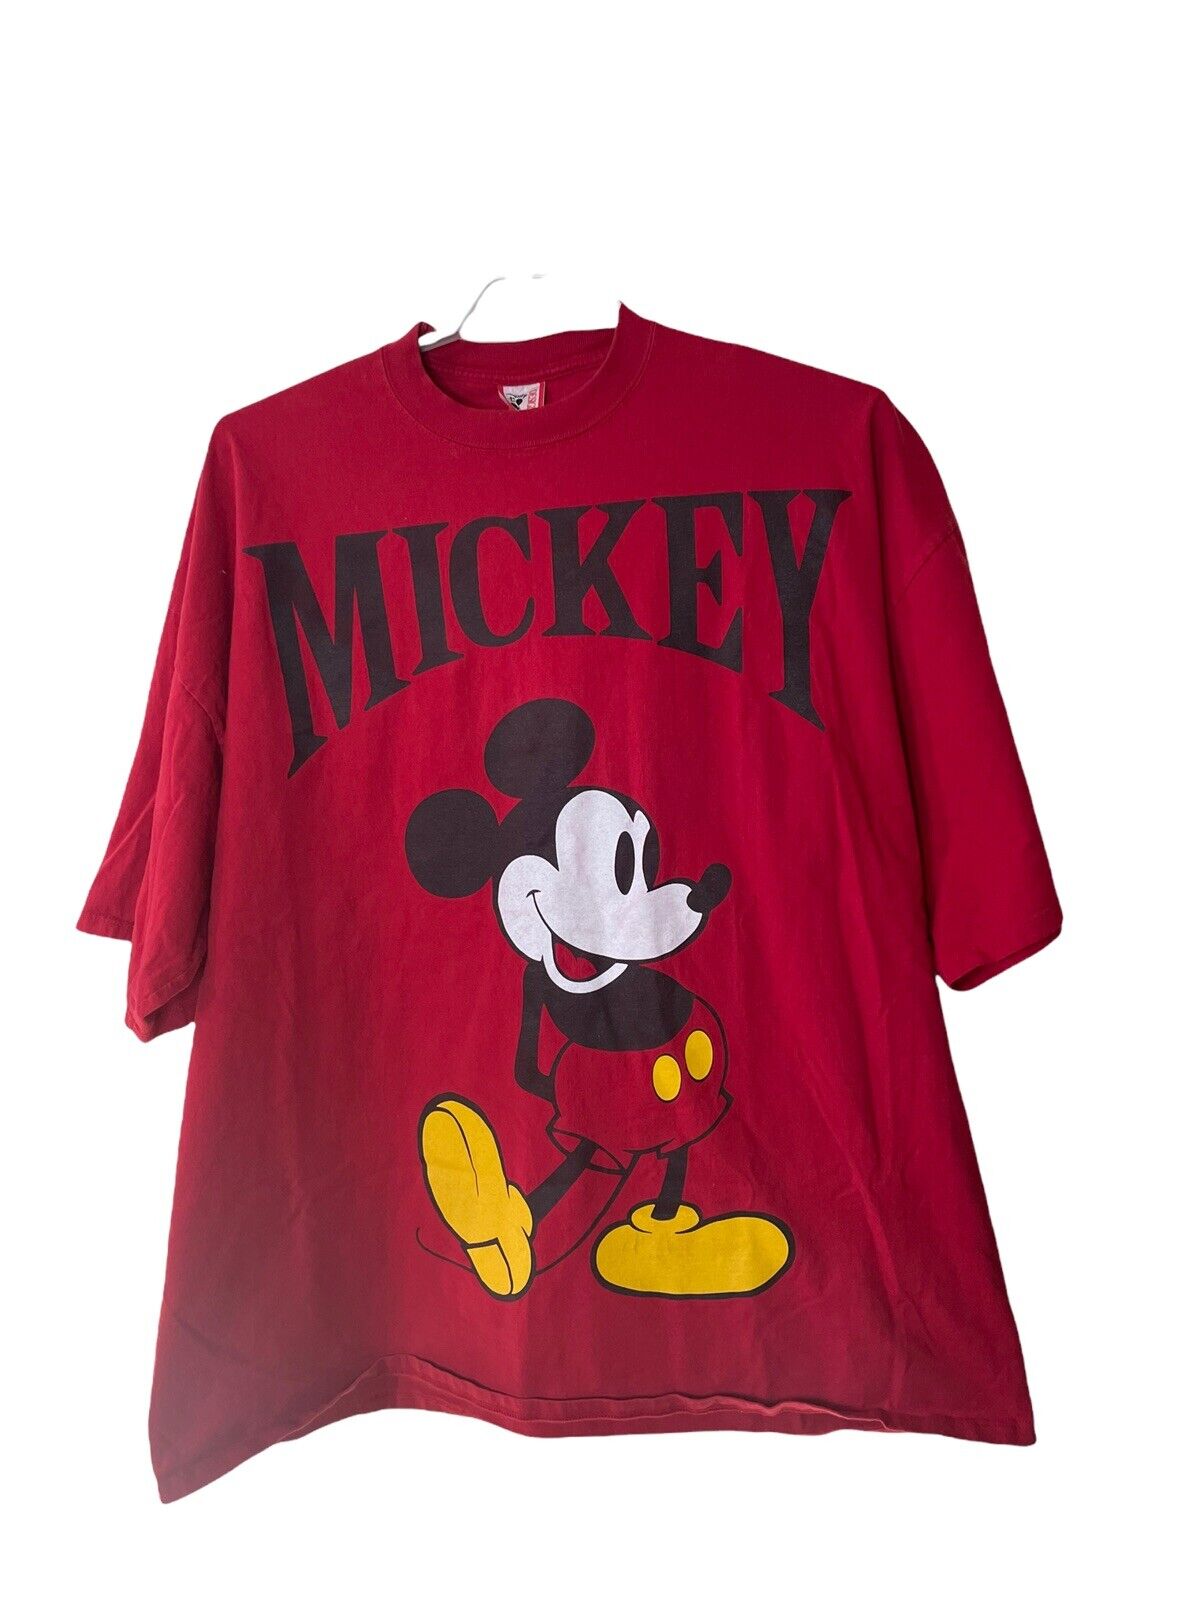 Vintage Disney Designs One Size Fits All MICKEY T-Shirt Made USA 